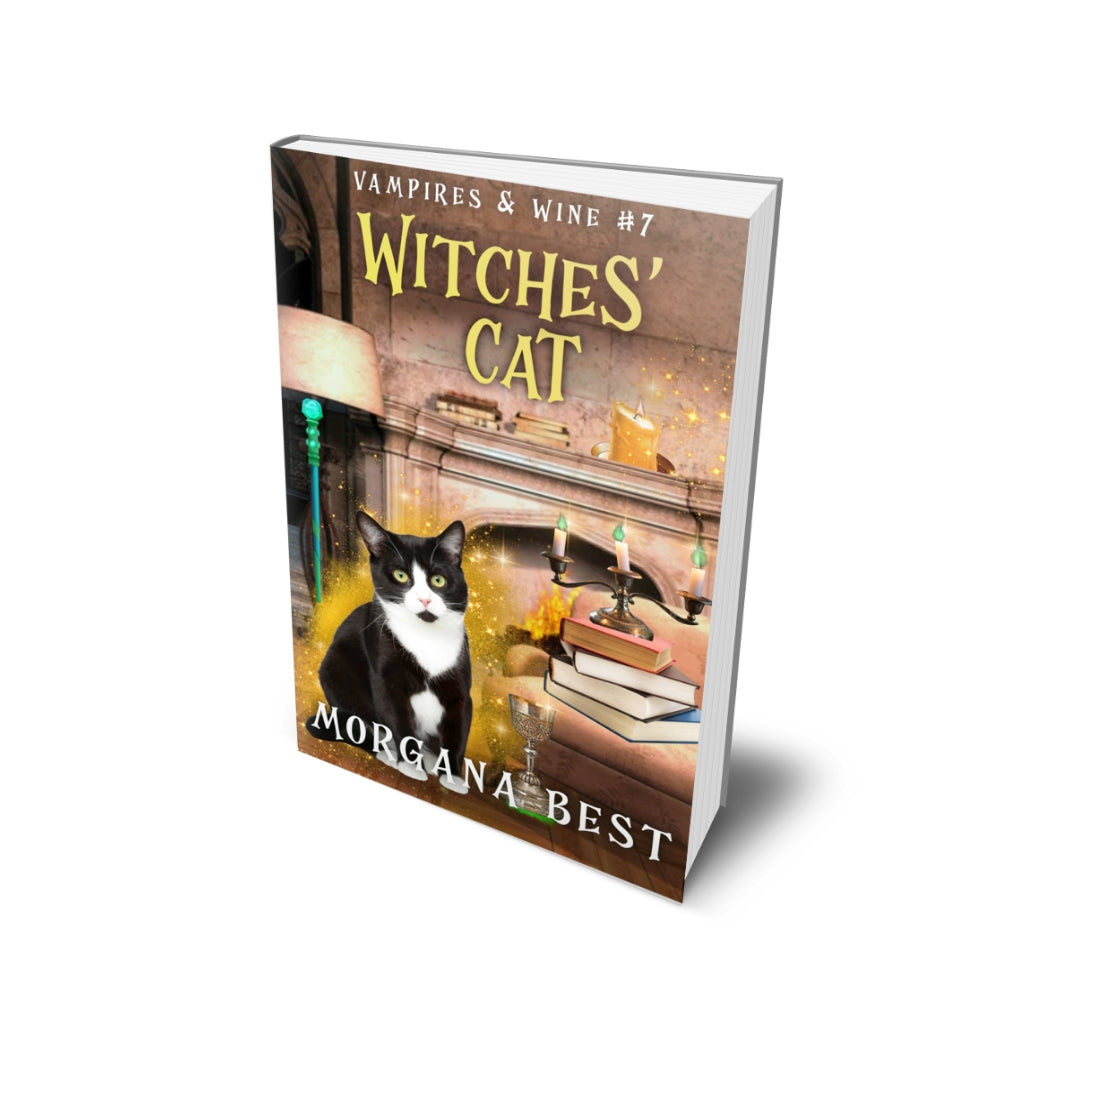 Witches’ Cat PAPERBACK cozy mystery